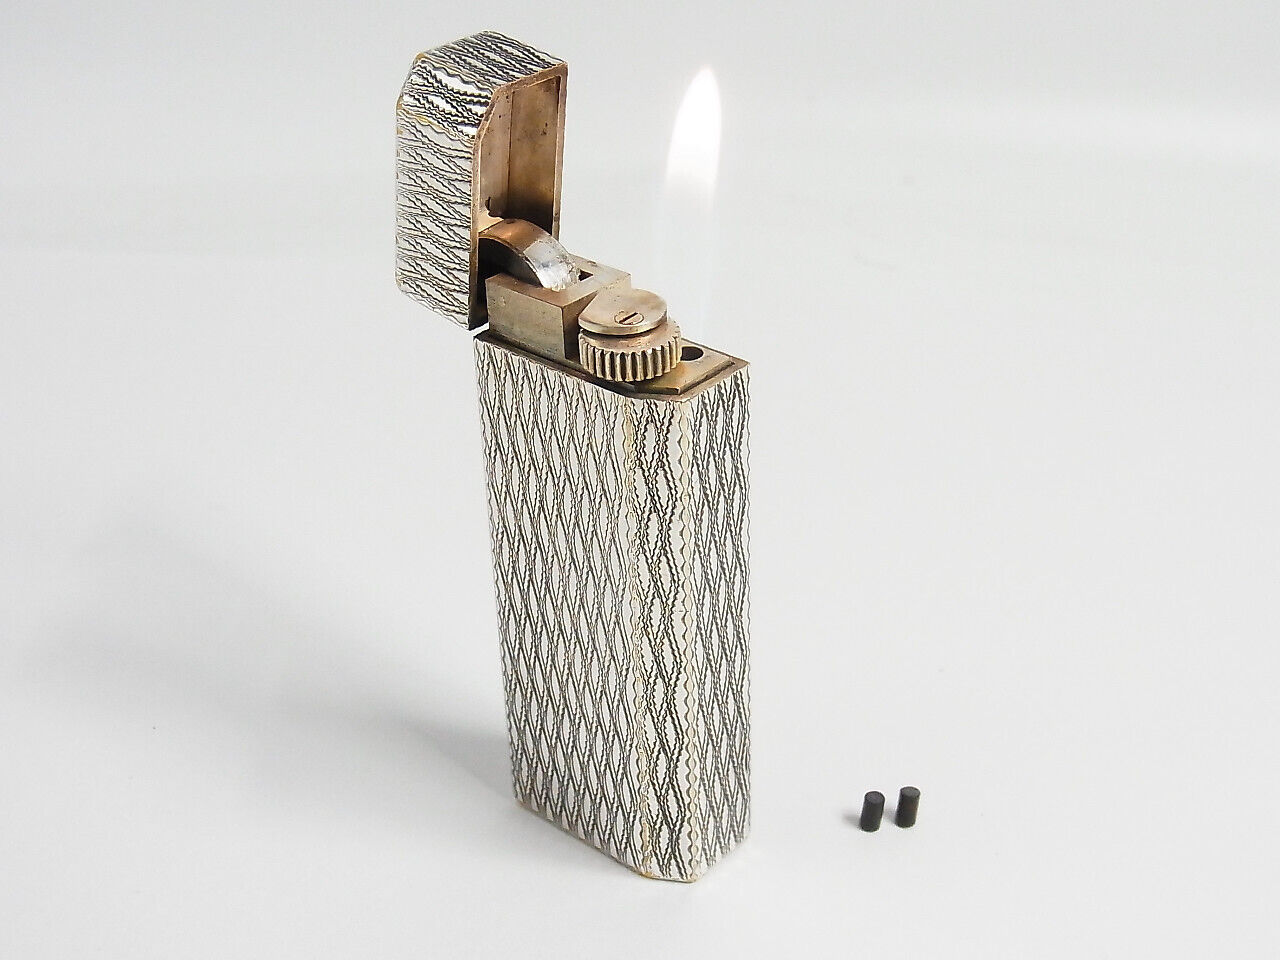 All Working Cartier Pentagon Gas Lighter 30 Microns Silver Plated With 2p flint